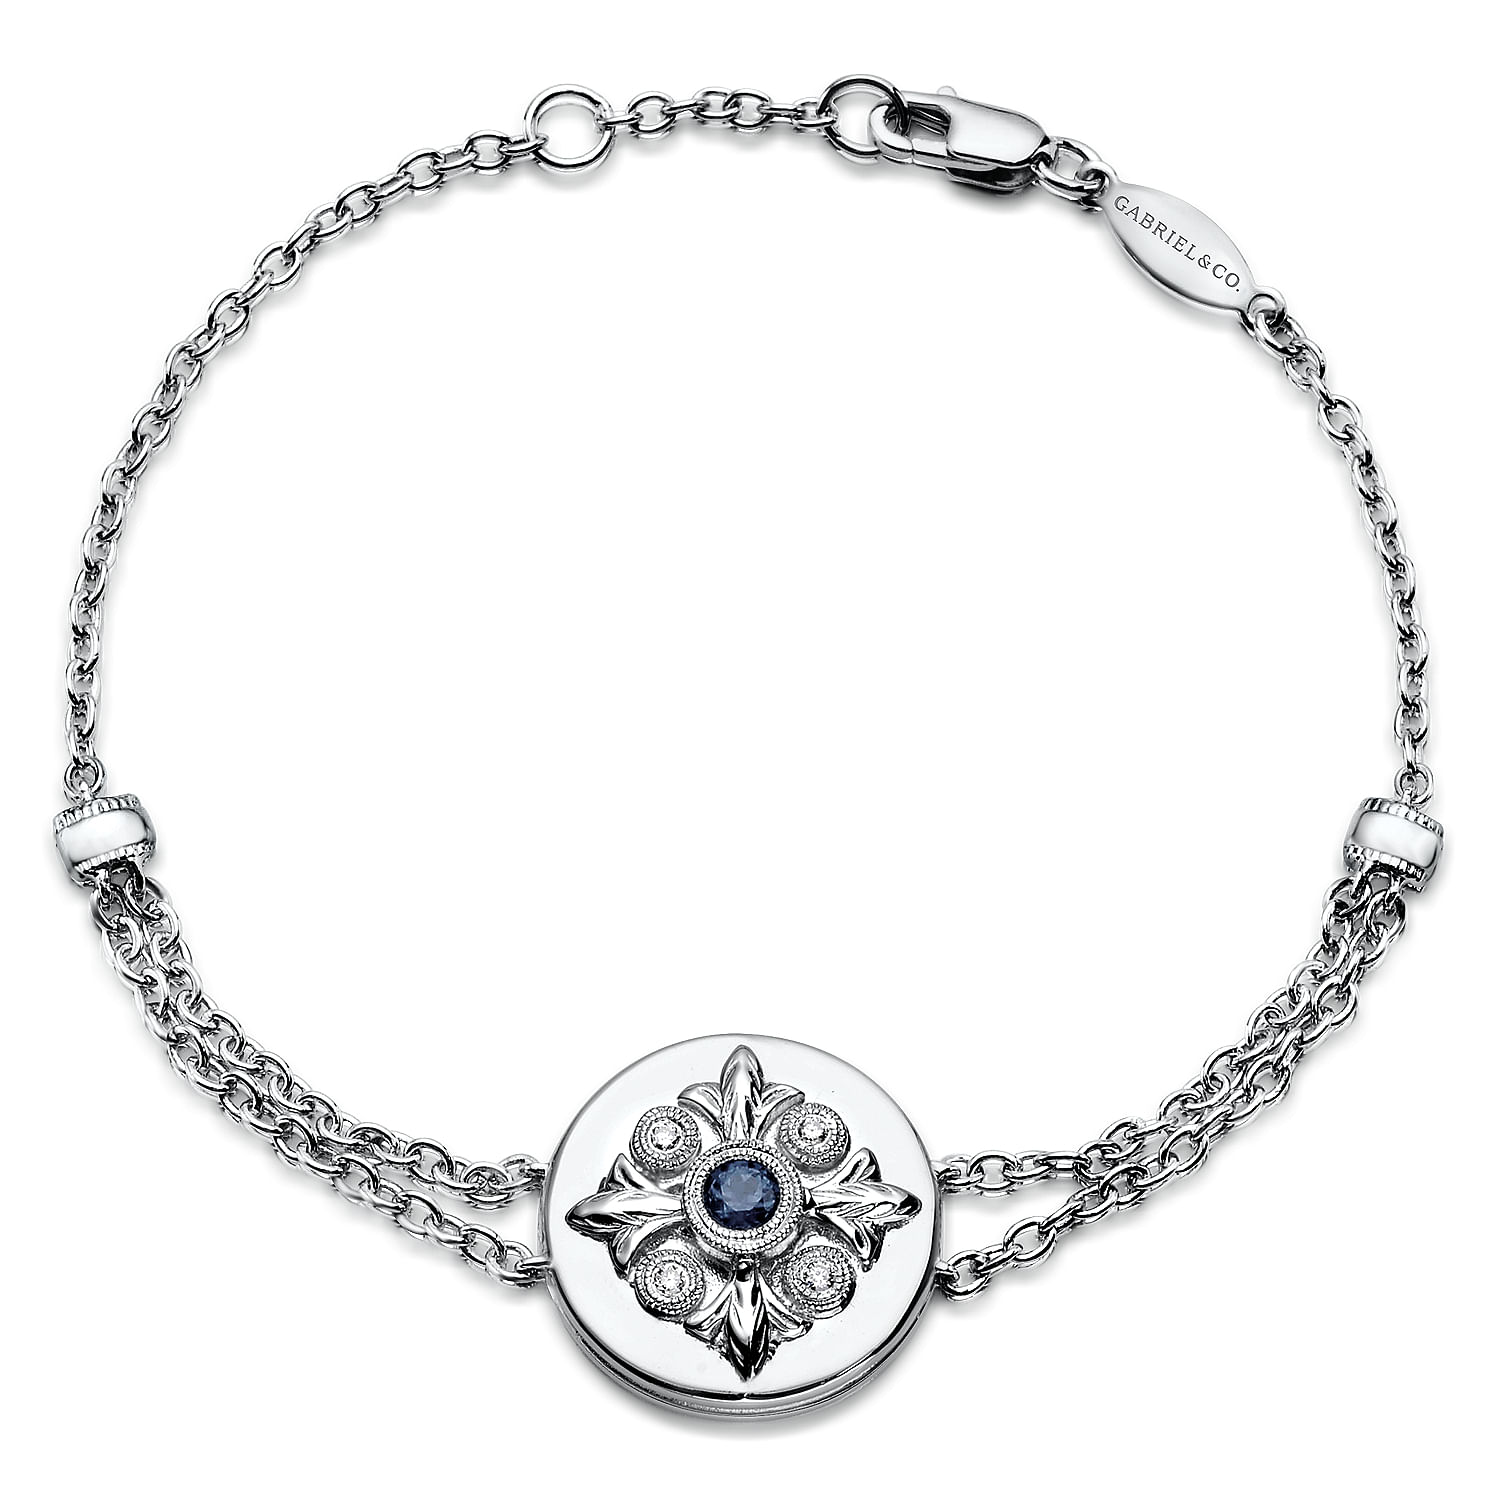 925 Sterling Silver Chain Bracelet with Round Sapphire Filigree Charm